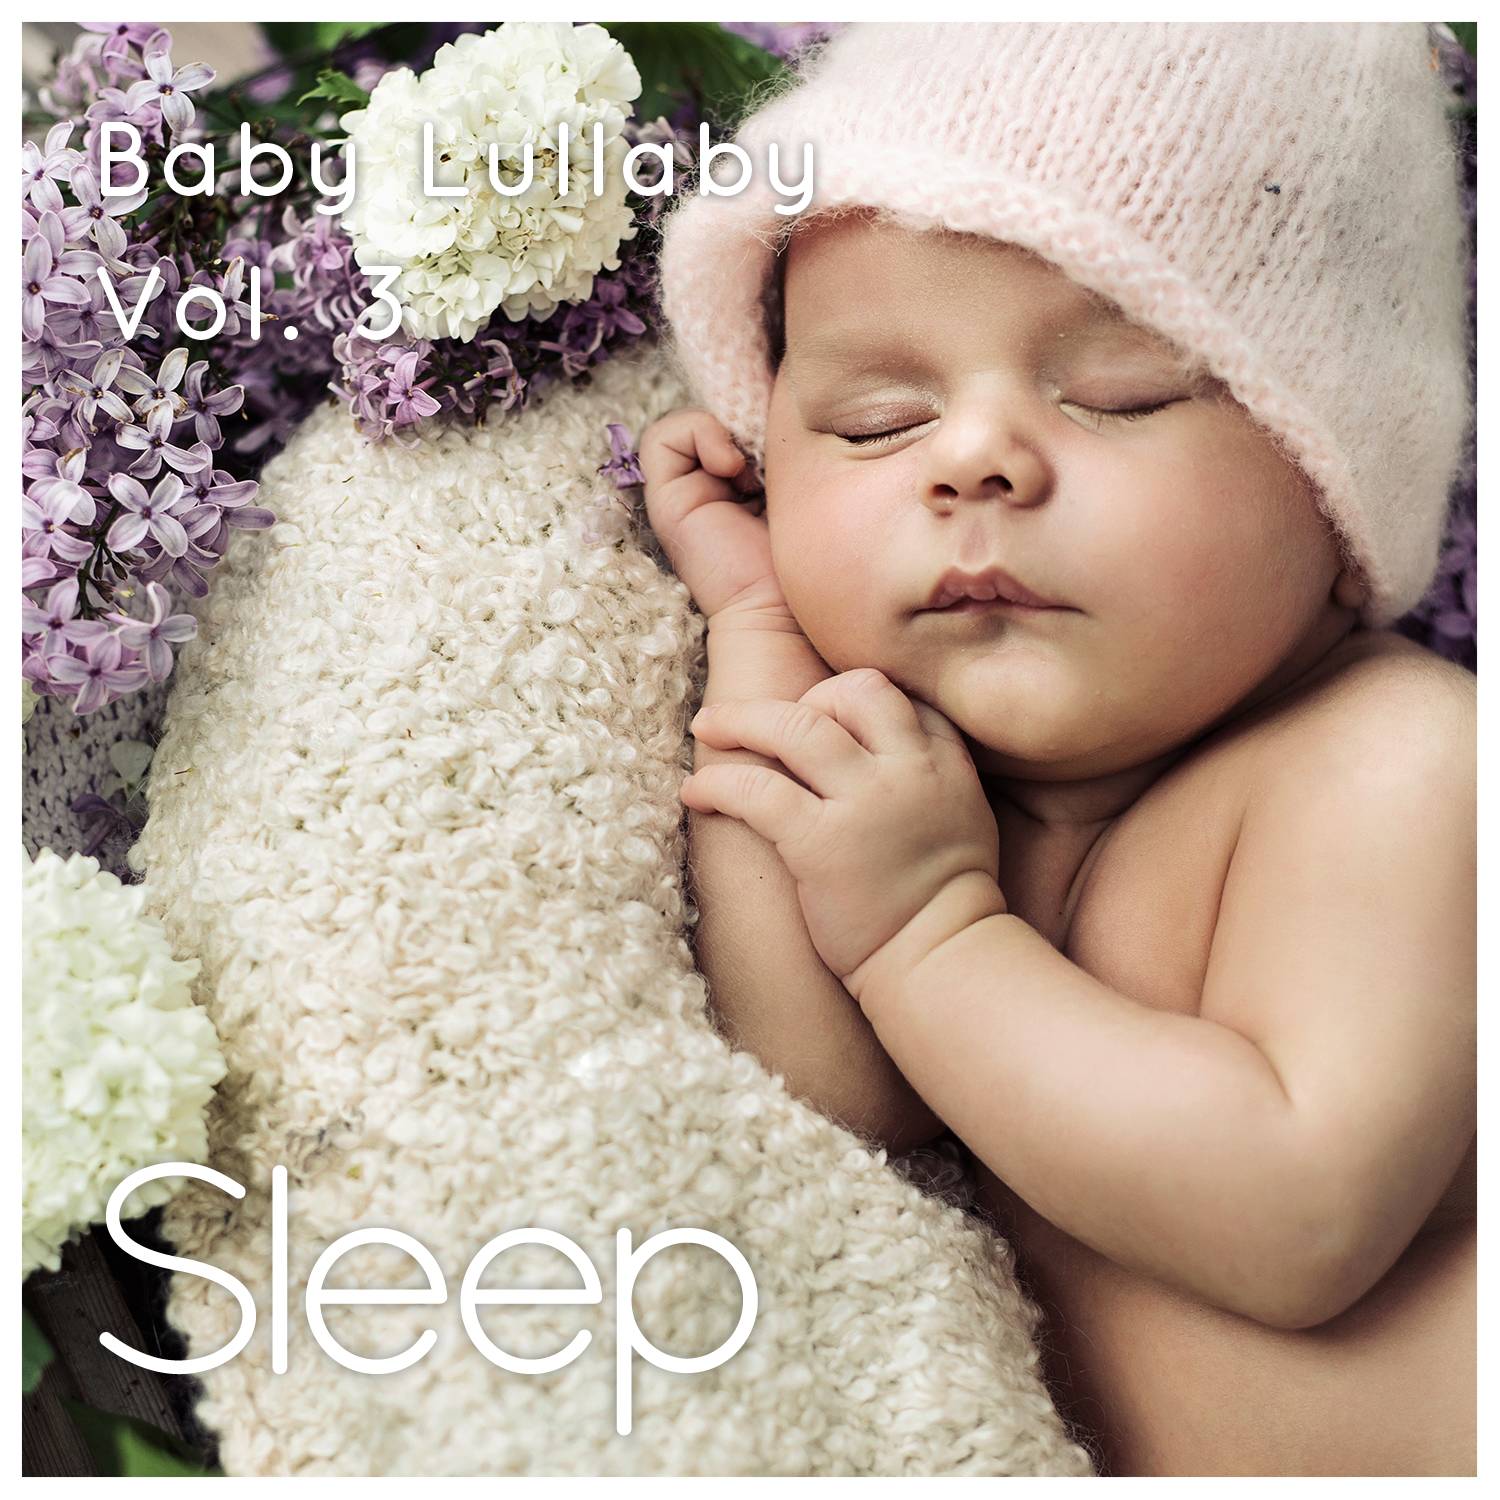 Baby Sleep Ambient Lullaby, Pt. 11